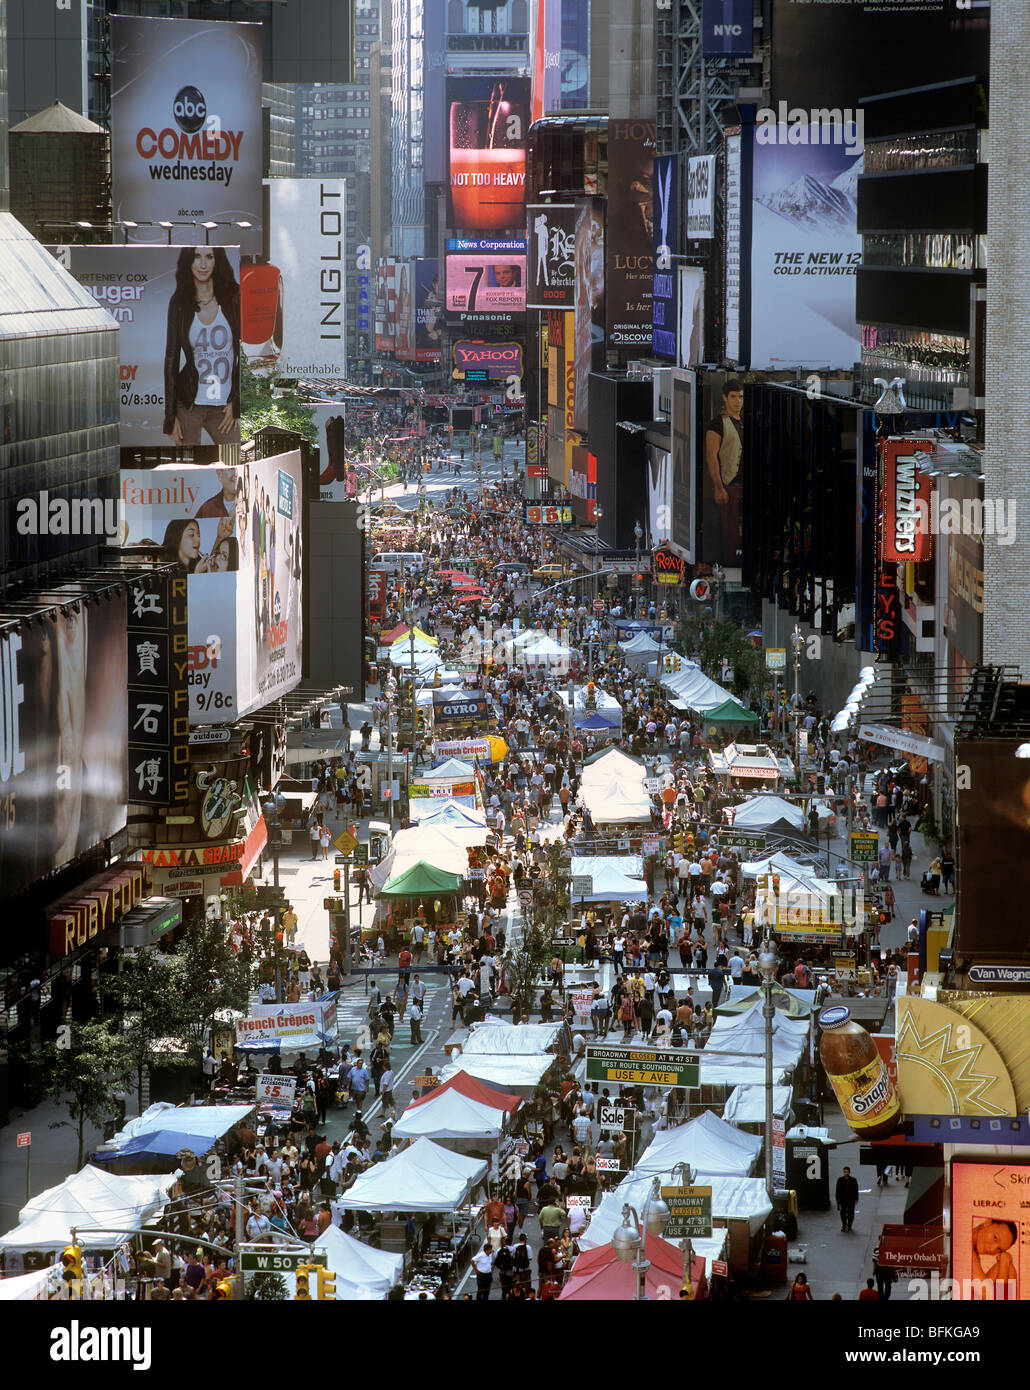 A street market on Broadway, New York - held on Sundays when the street is closed to traffic. Times Square is in the background. Stock Photo